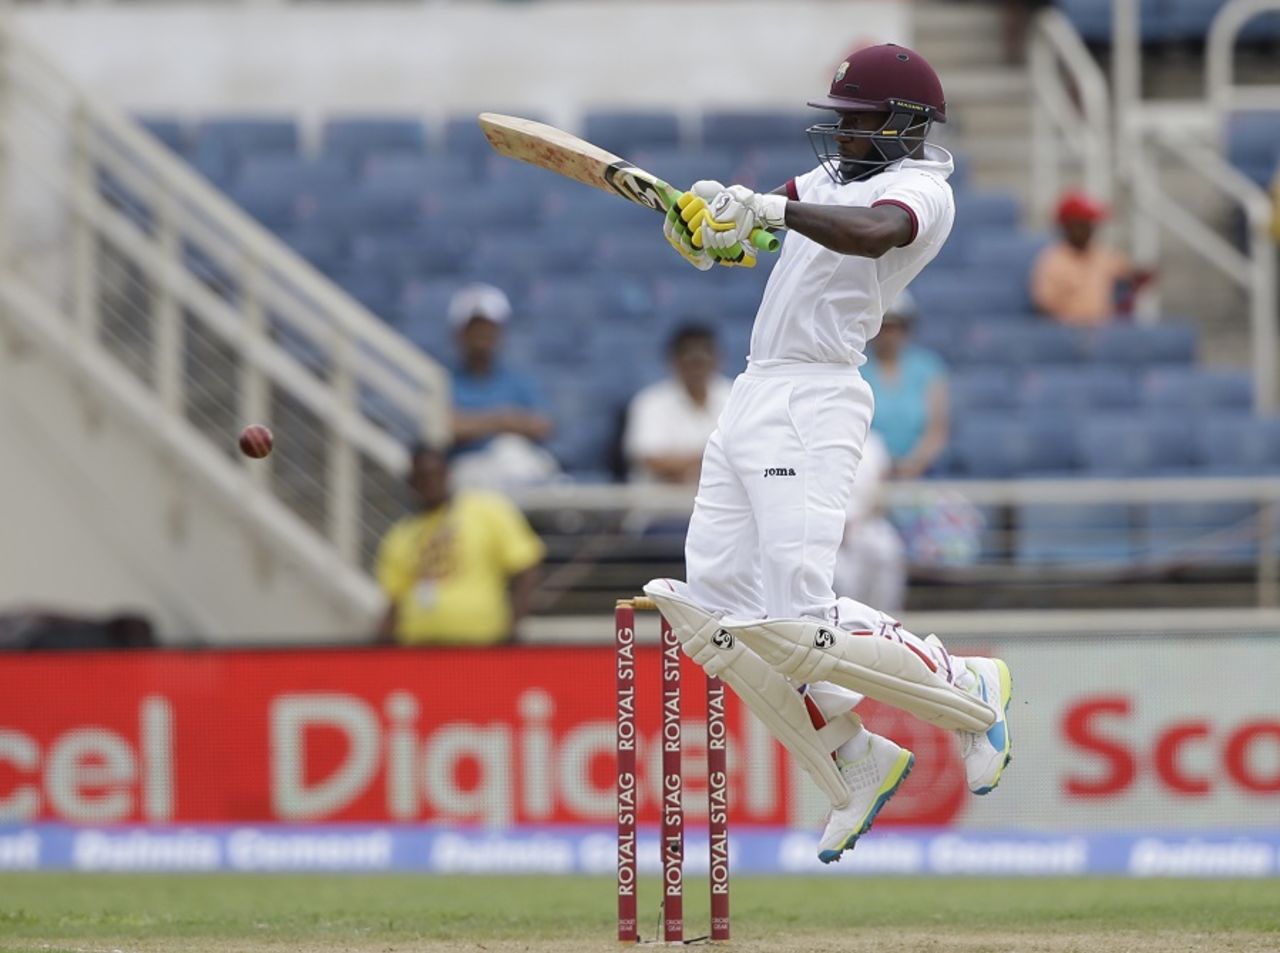 Jermaine Blackwood gets on top of the bounce, West Indies v India, 2nd Test, Kingston, 1st day, July 30, 2016